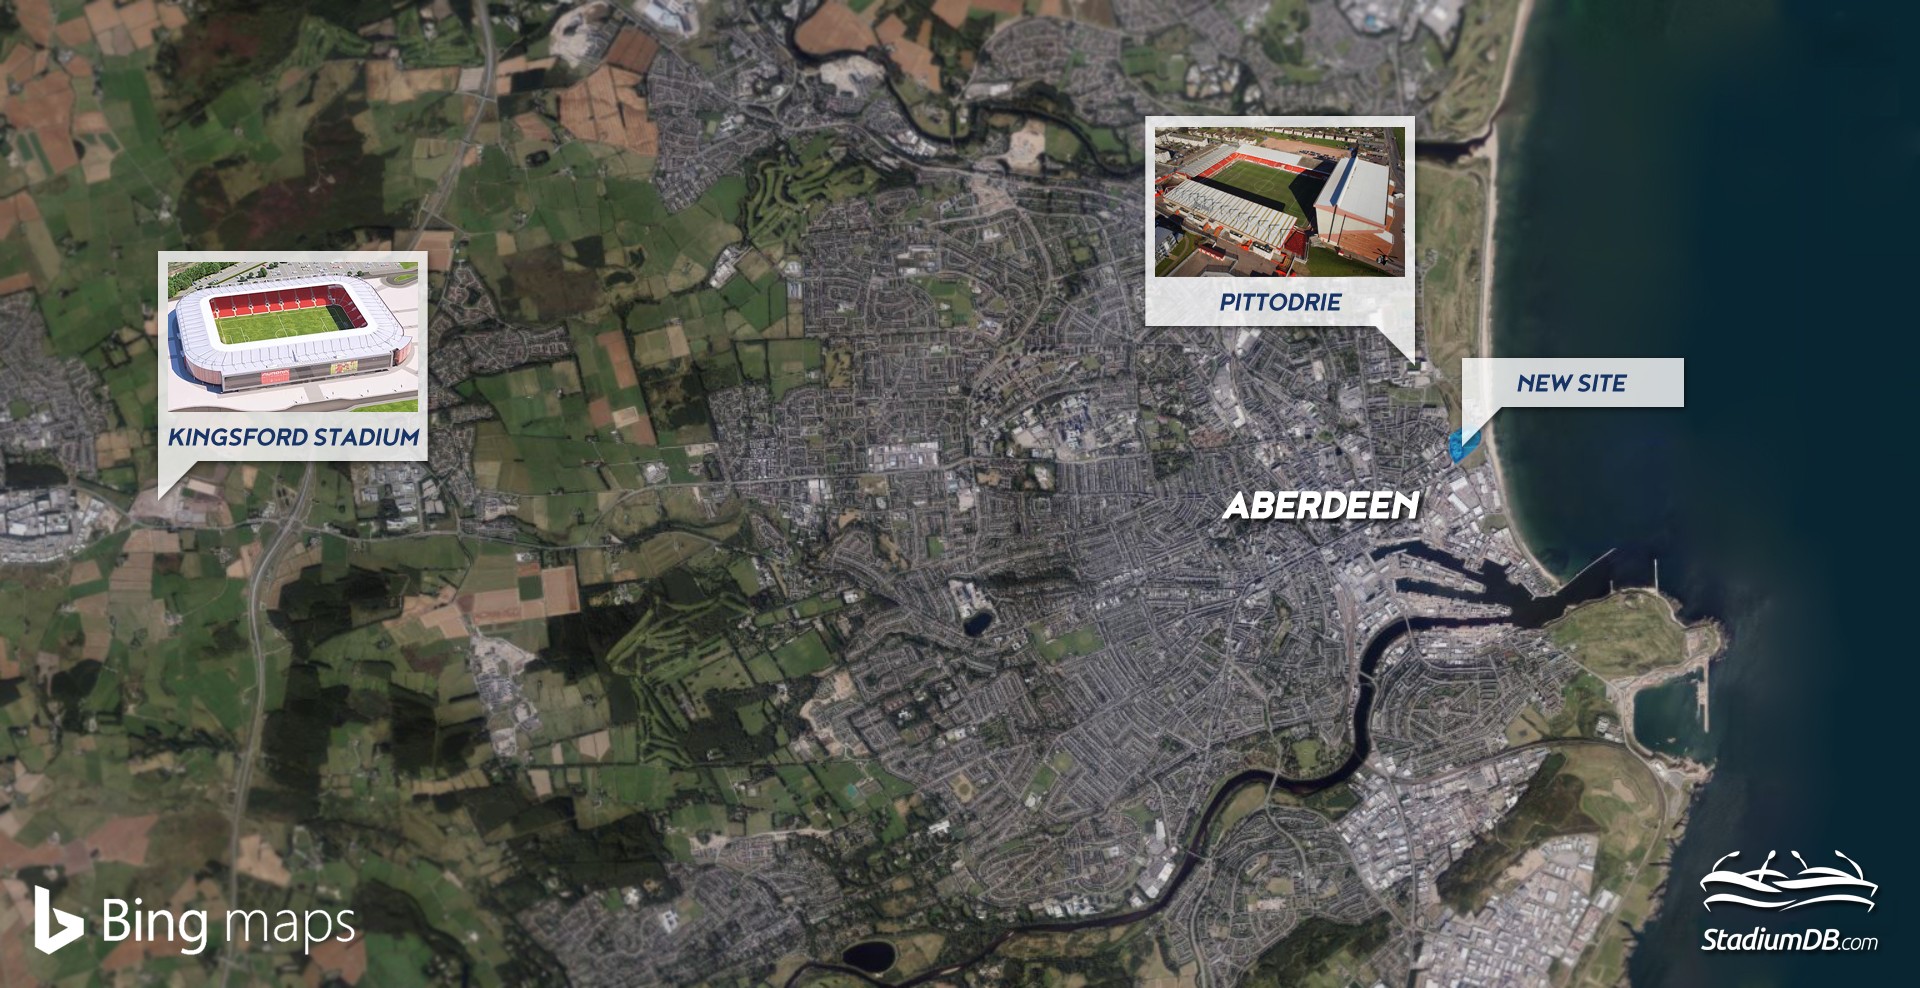 Aberdeen FC Stadium, Kingsford or new site?